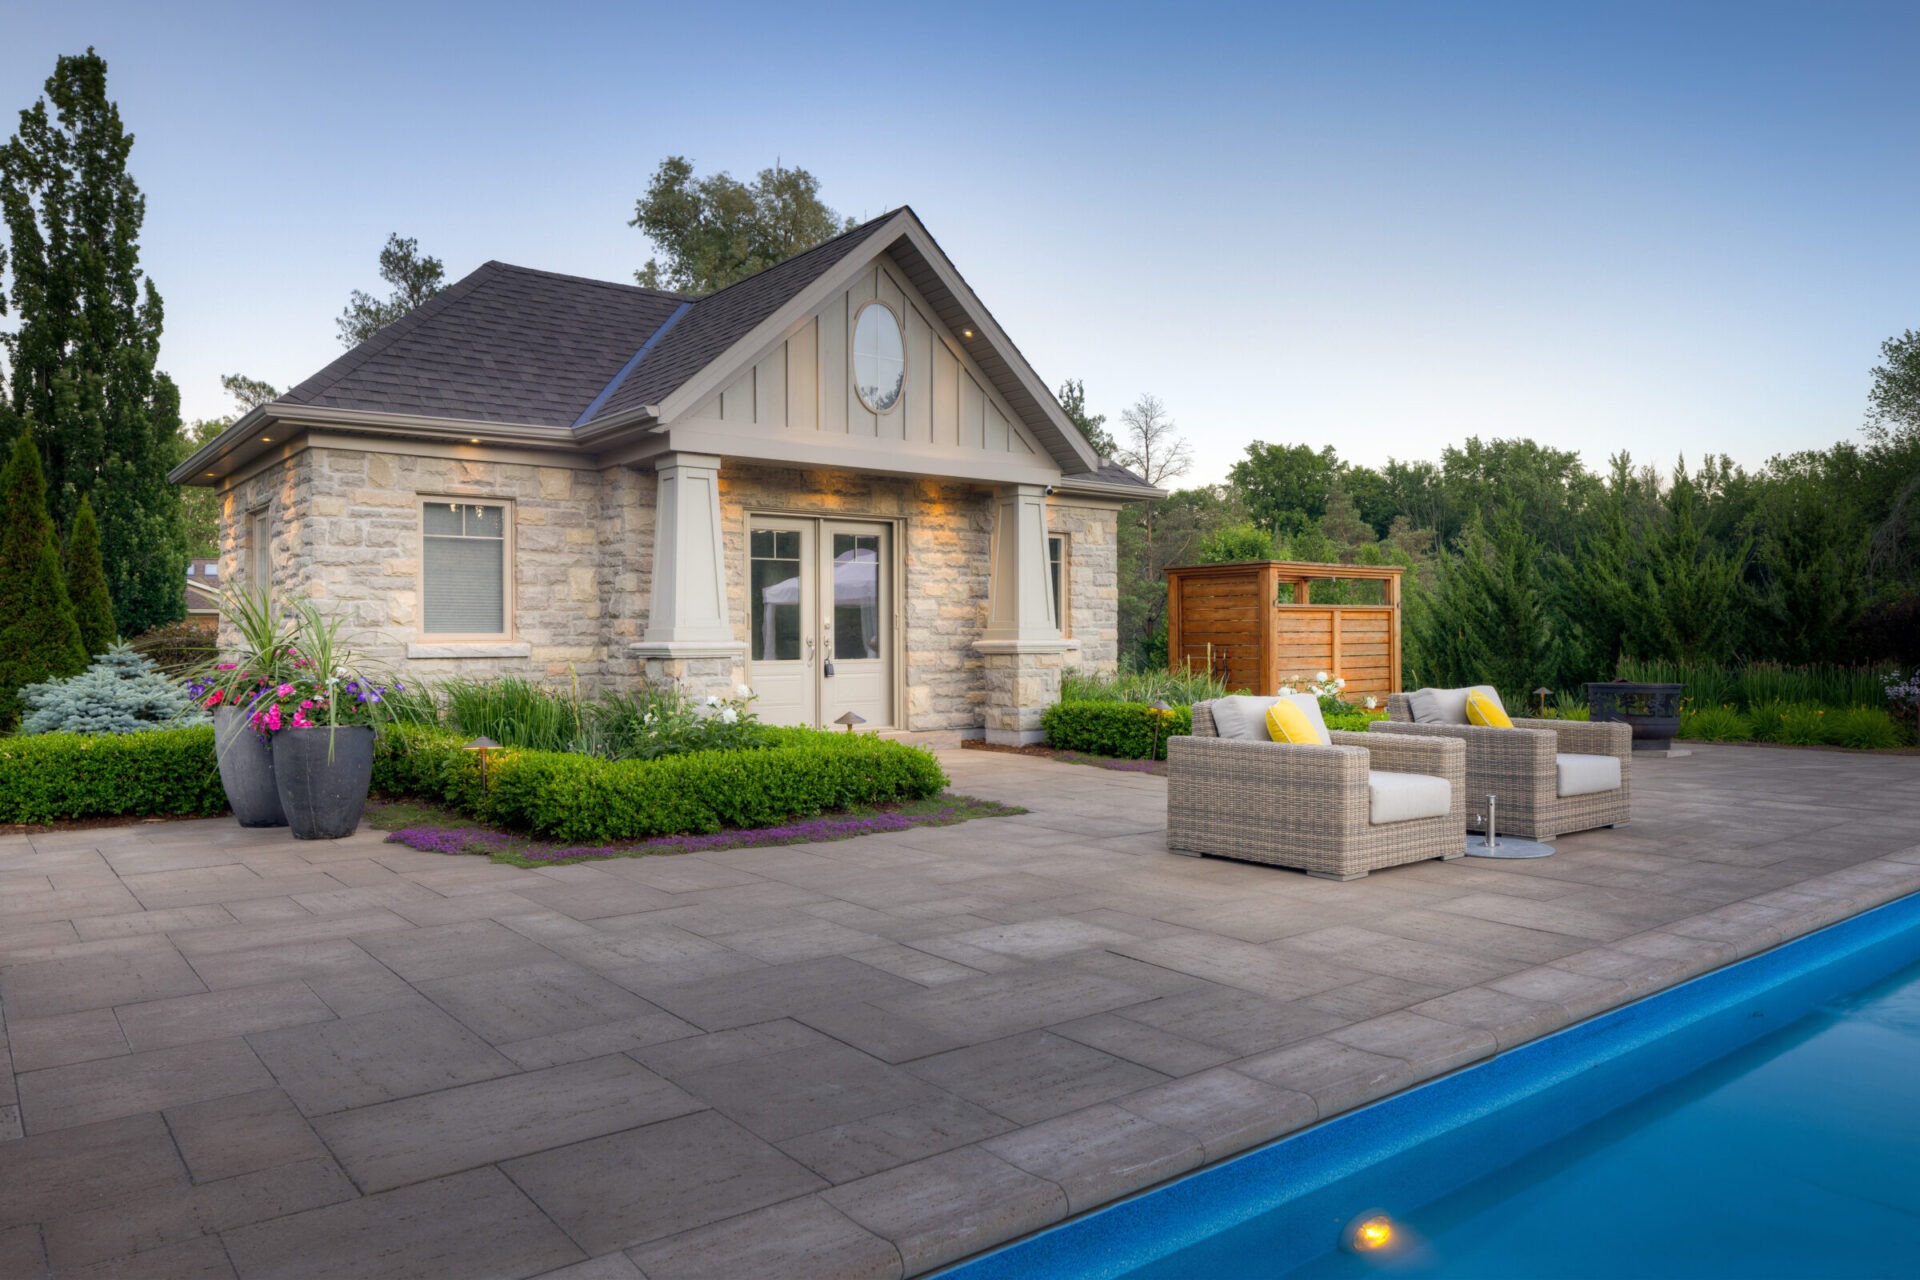 A cozy suburban house with stone veneer under a clear sky. A patio features outdoor furniture near a pool, surrounded by lush landscaping.